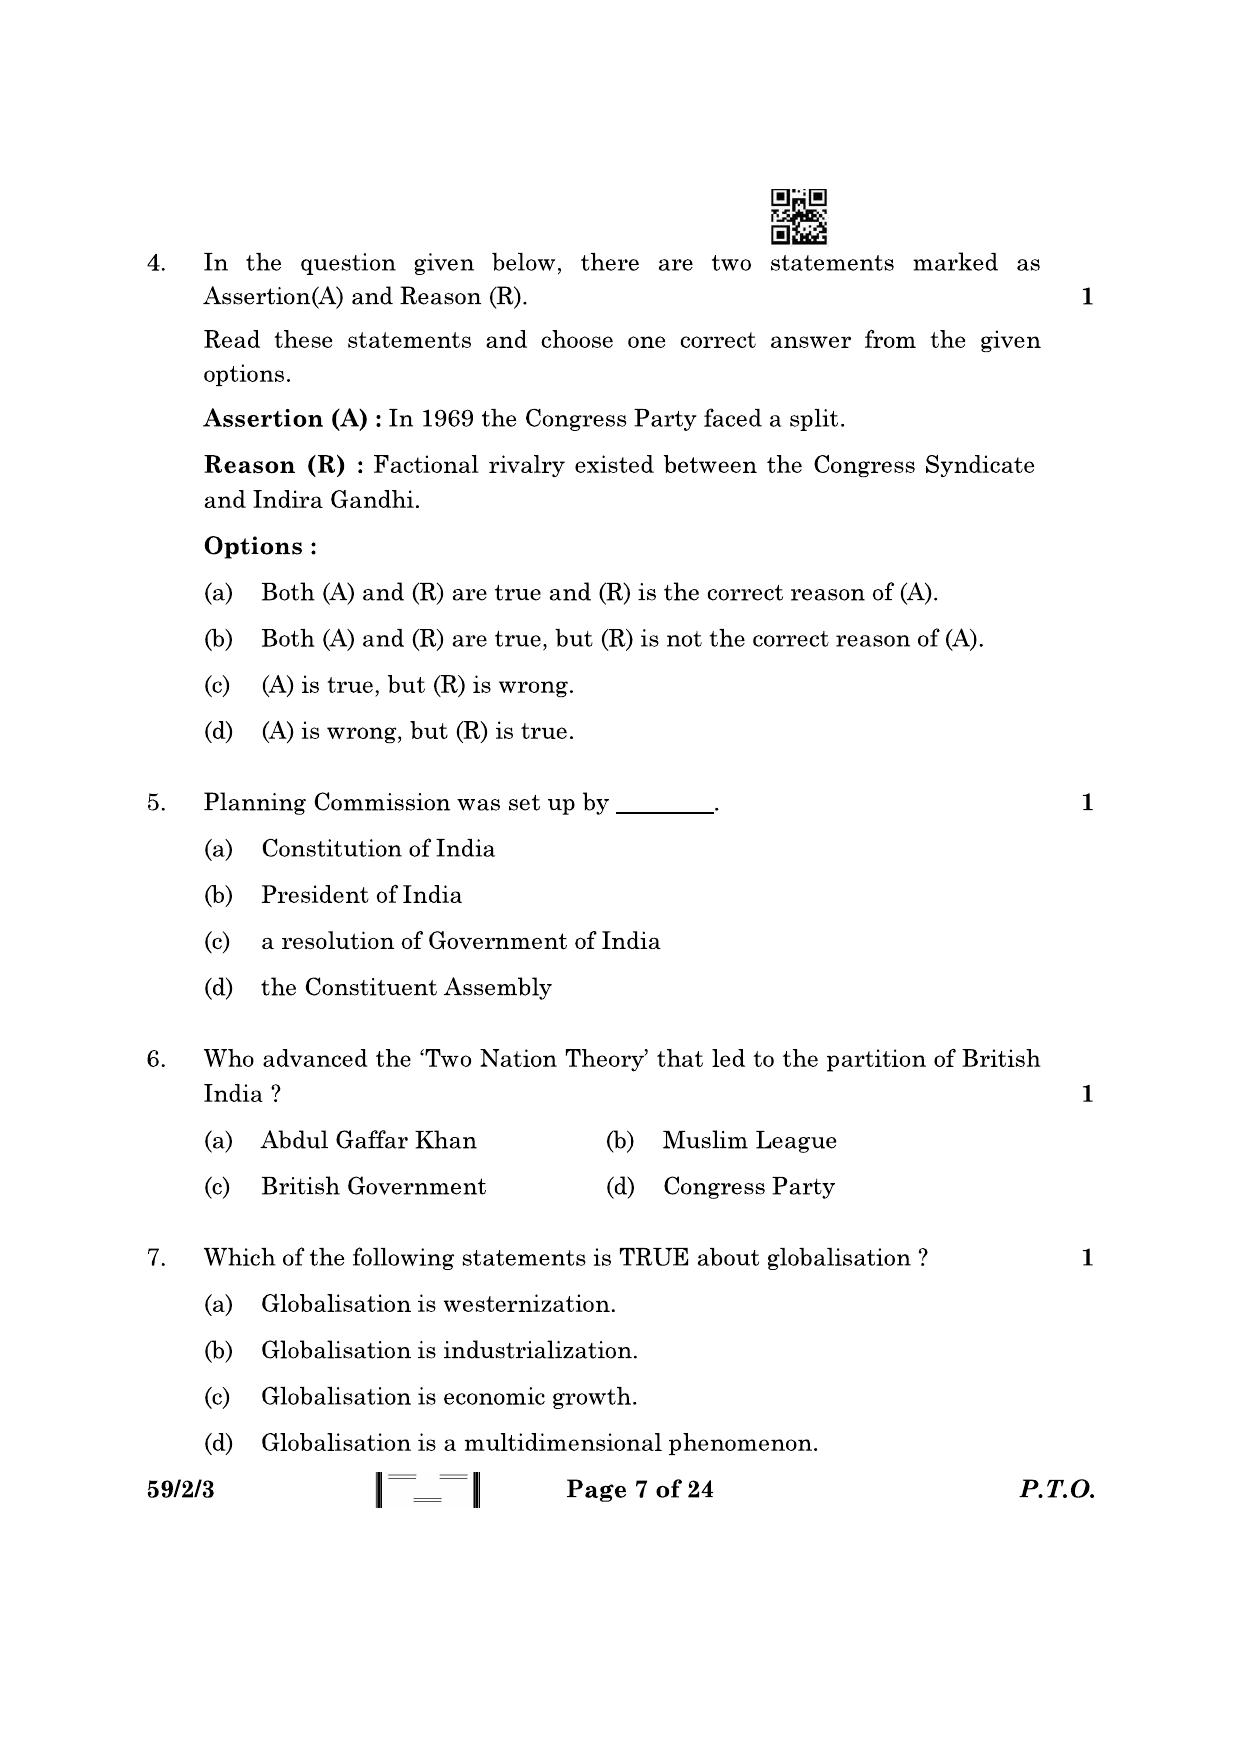 CBSE Class 12 59-2-3 Political Science 2023 Question Paper - Page 7